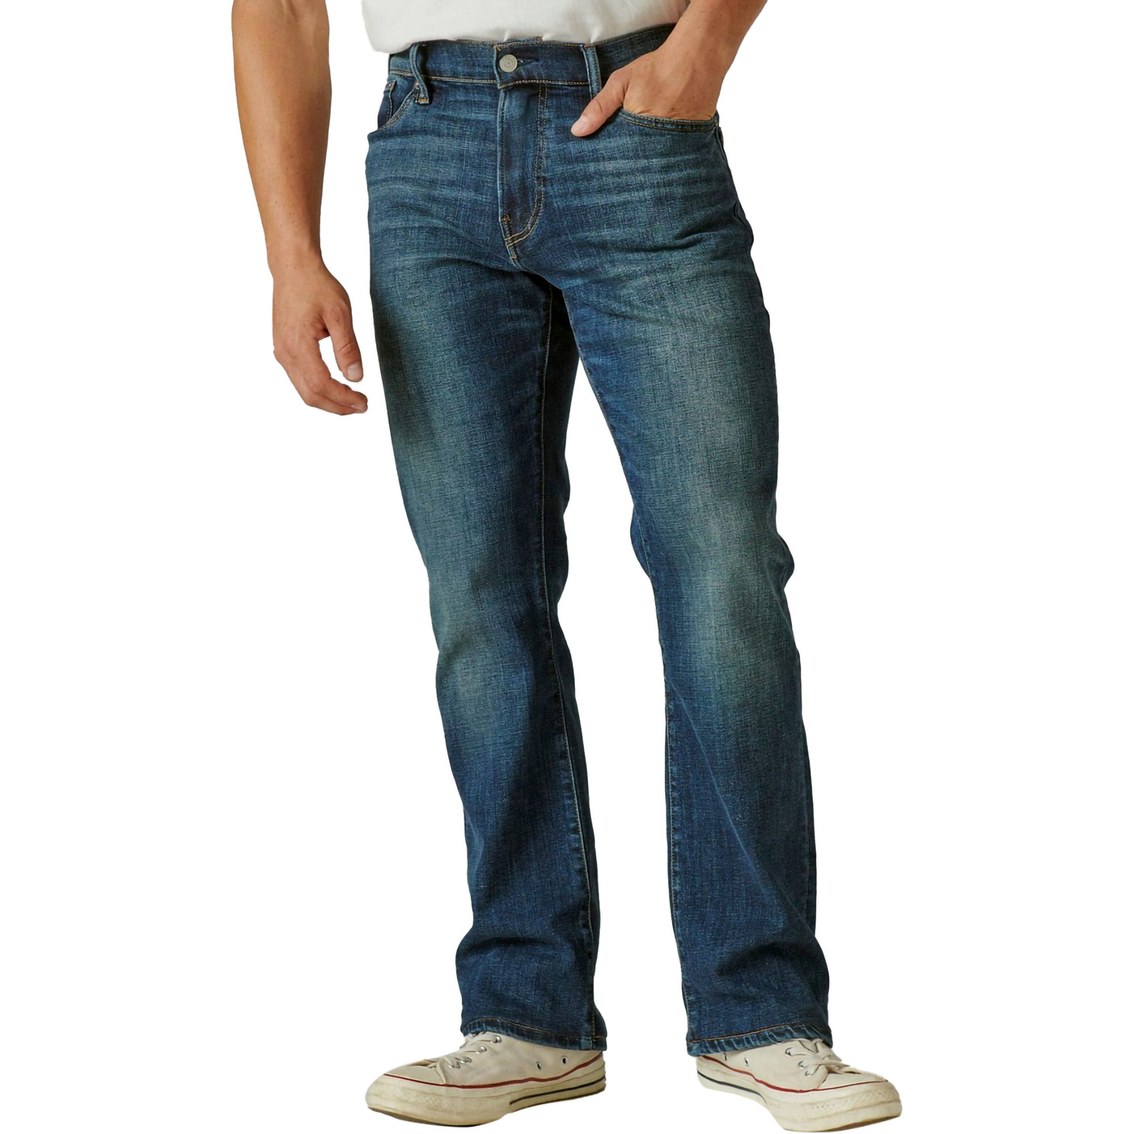 Easy Rider Bootcut Coolmax Stretch Jeans | Jeans | Clothing ...